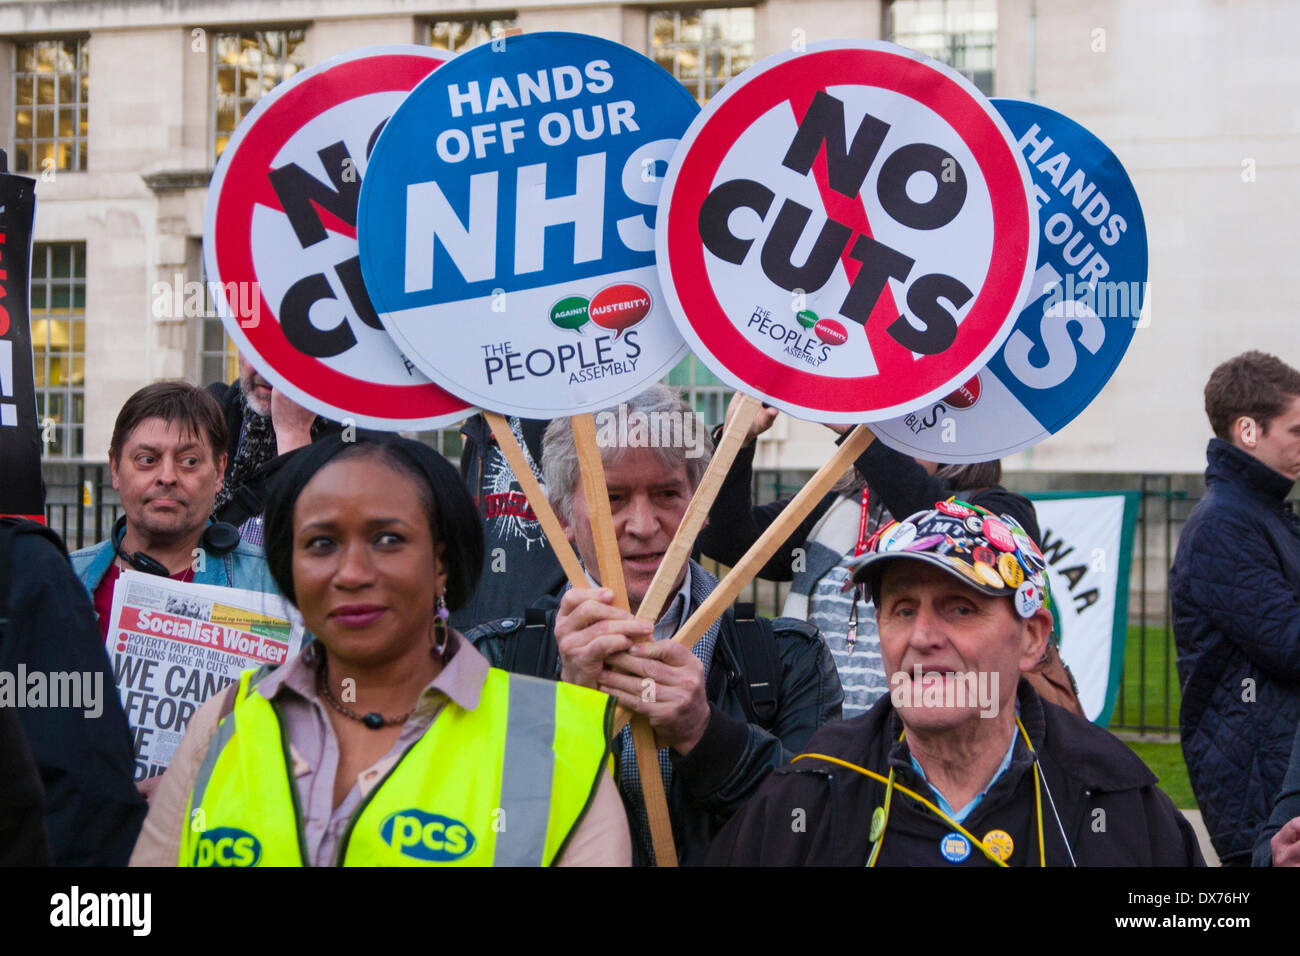 London, UK. March 19th 2014. Protesters from The People's Assembly Against Austerity protest outside Downing Street on Budget Day demanding no more cuts that affect the poor. Credit:  Paul Davey/Alamy Live News Stock Photo